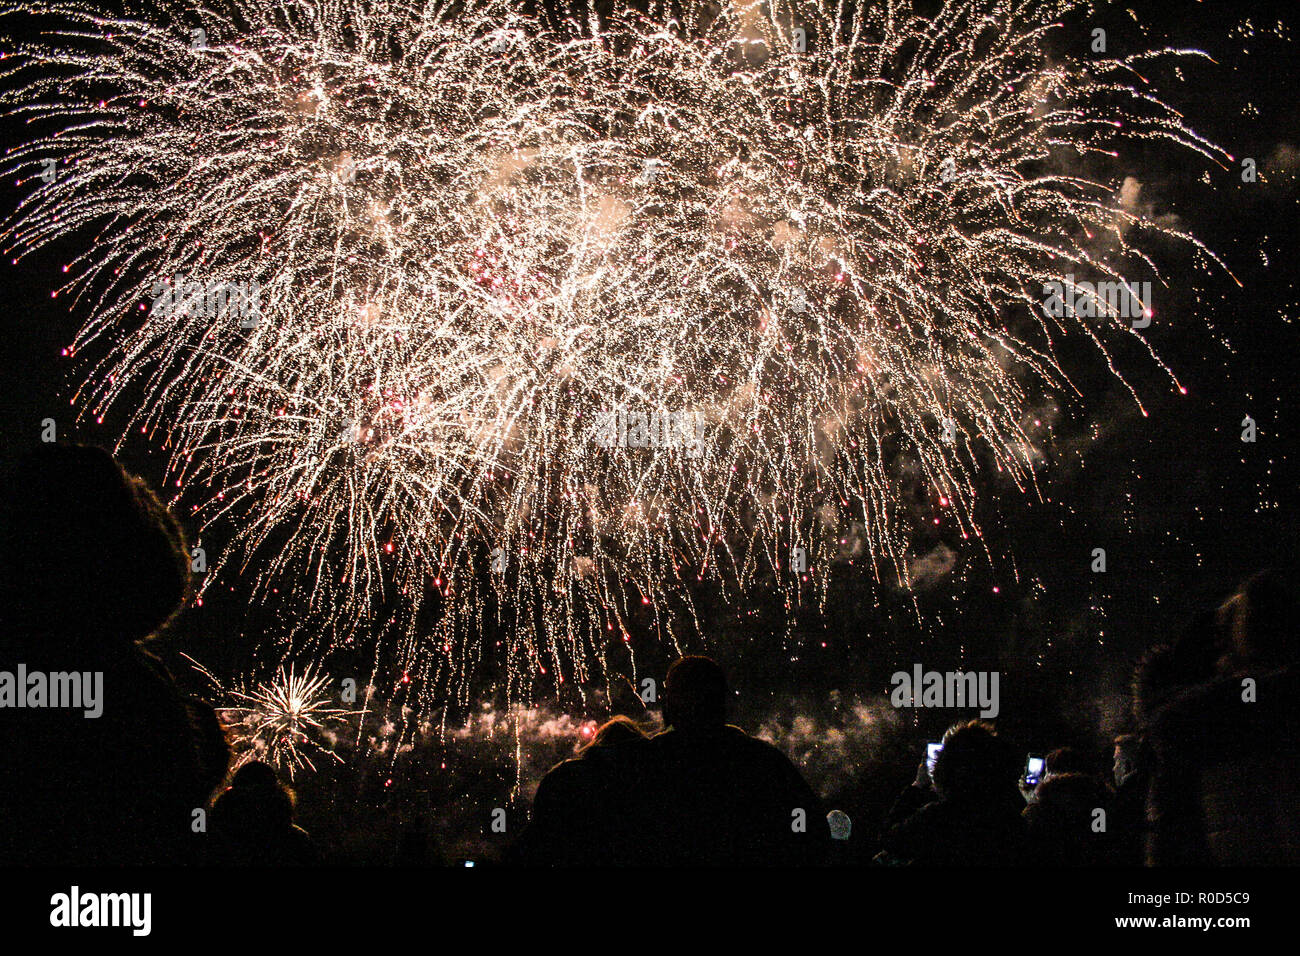 Dudley, West Midlands, UK. 3rd November, 2018. The Bonfire night and fireworks show at the Himley Hall and Park. Dudley, West Midlands - Birmingham area. Guy Fawkes night.  03 November 2018. Gunpowder Plot remembrance. Credit: Tempera Photography Studio/Alamy Live News Stock Photo